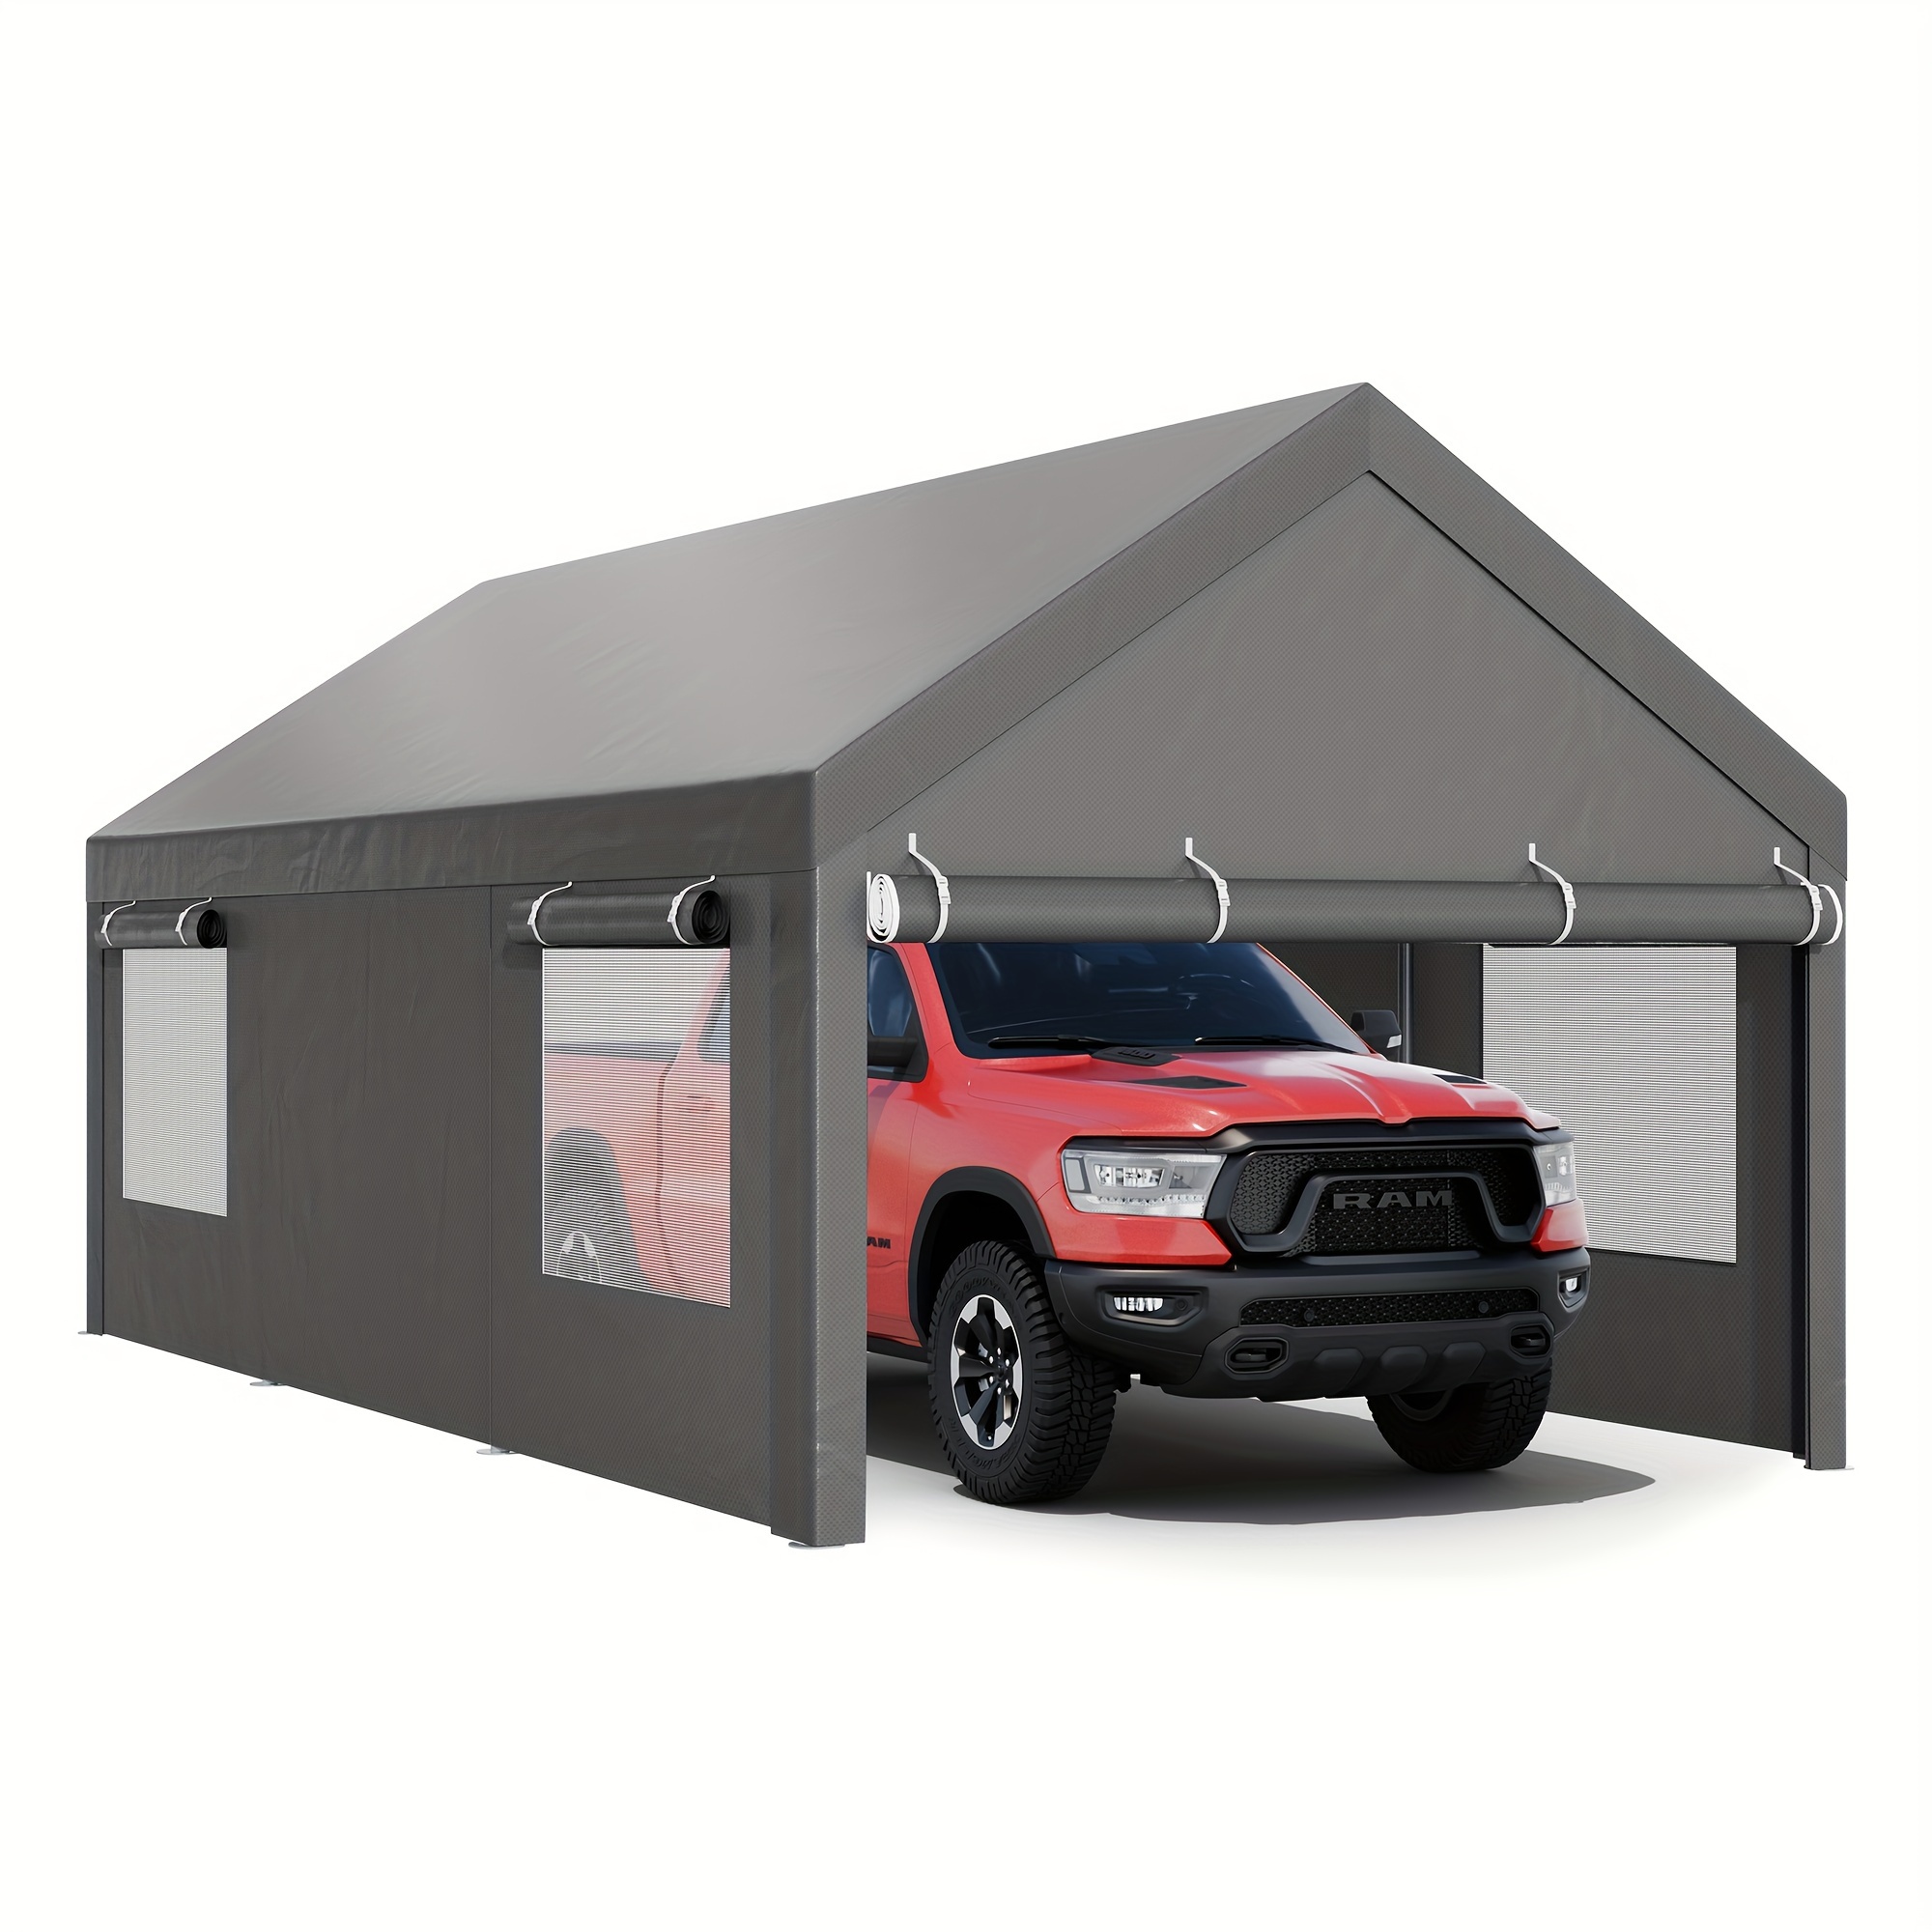 

Tenwachy 10x20 Ft Carport Heavy Duty Waterproof Uv Protected Portable Car Cover Tent Large Space Canopy Storage Shelter Shed Outdoor Portable Storage Shelter For Car Truck Boat